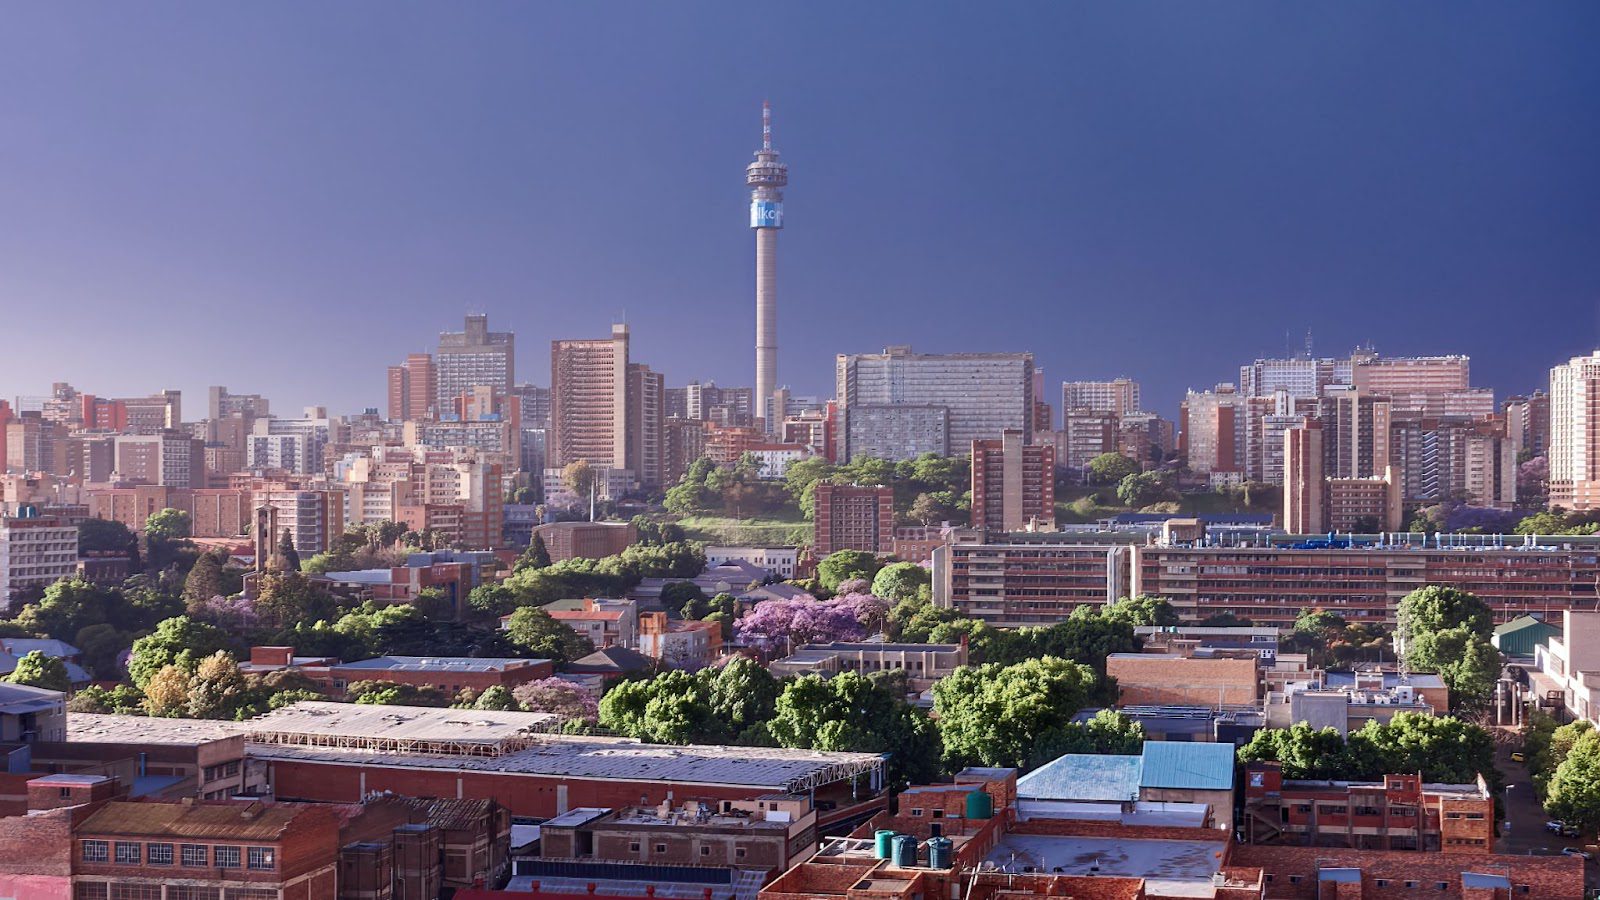 View of the city of Johannesburg, South Africa]